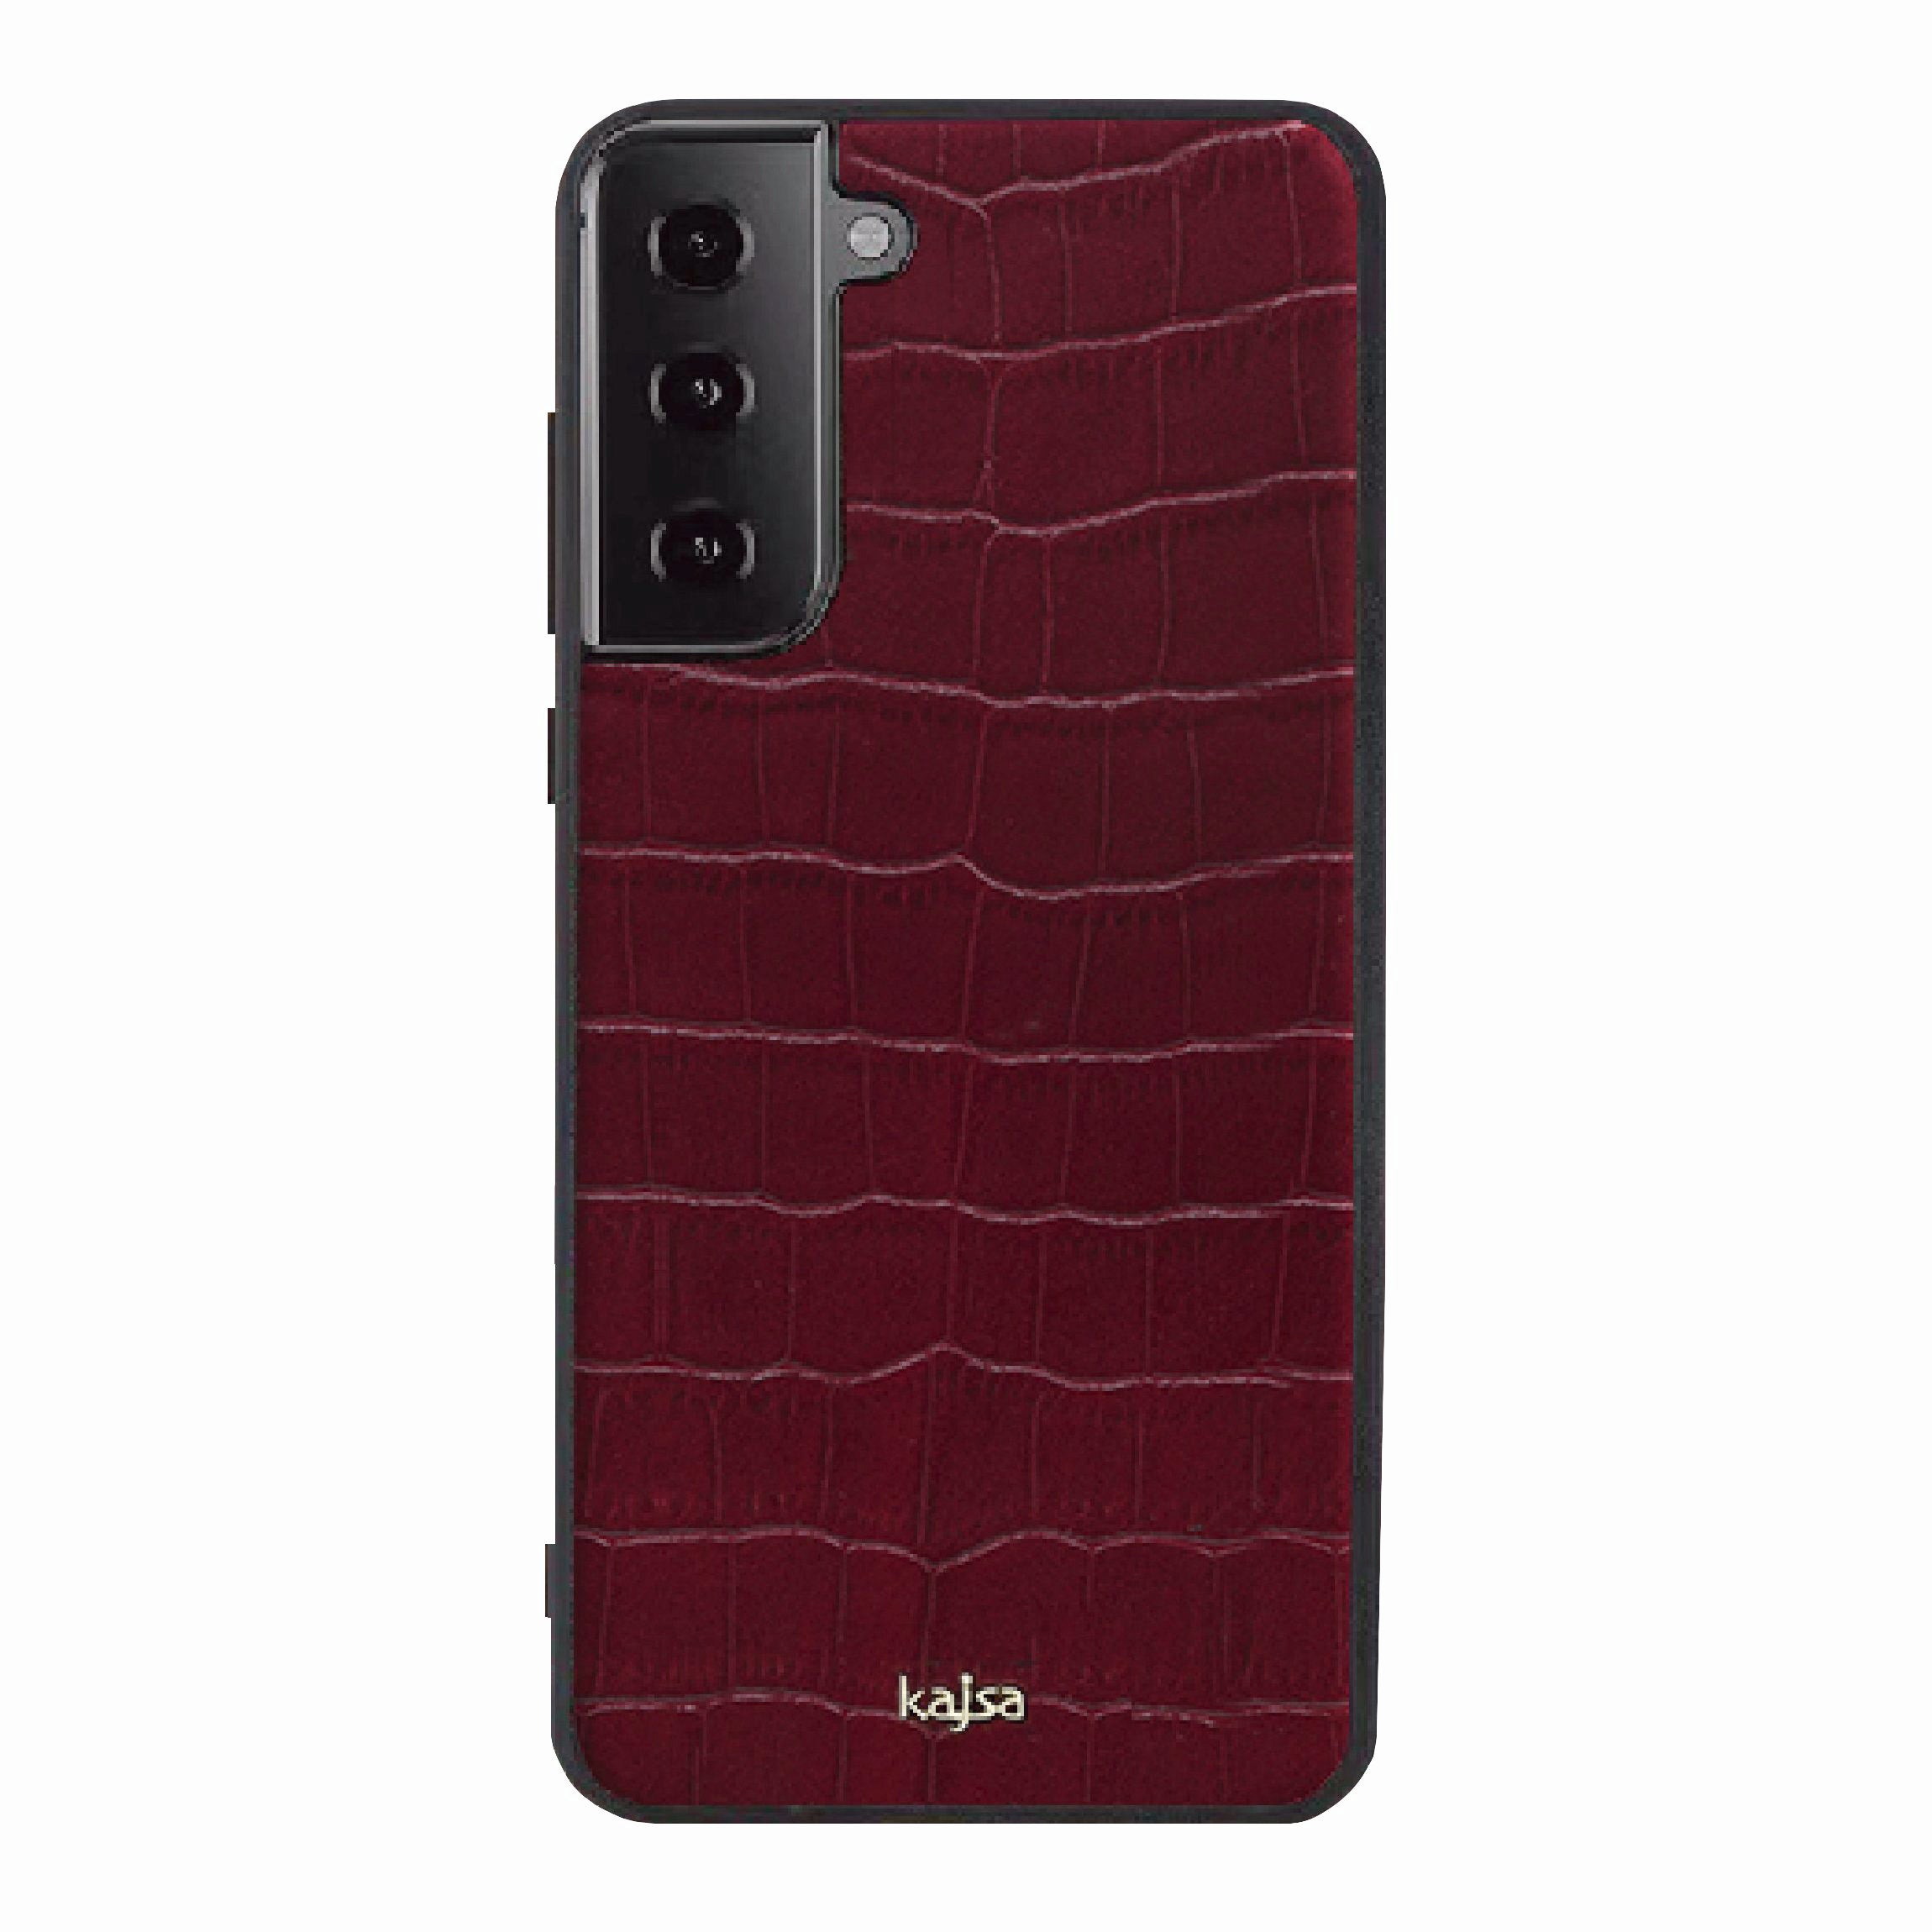 Neo Classic Collection - Genuine Croco Pattern Leather Back Case for Samsung Galaxy S21/S21+/S21 Ultra-Phone Case- phone case - phone cases- phone cover- iphone cover- iphone case- iphone cases- leather case- leather cases- DIYCASE - custom case - leather cover - hand strap case - croco pattern case - snake pattern case - carbon fiber phone case - phone case brand - unique phone case - high quality - phone case brand - protective case - buy phone case hong kong - online buy phone case - iphone‎手機殼 - 客製化手機殼 